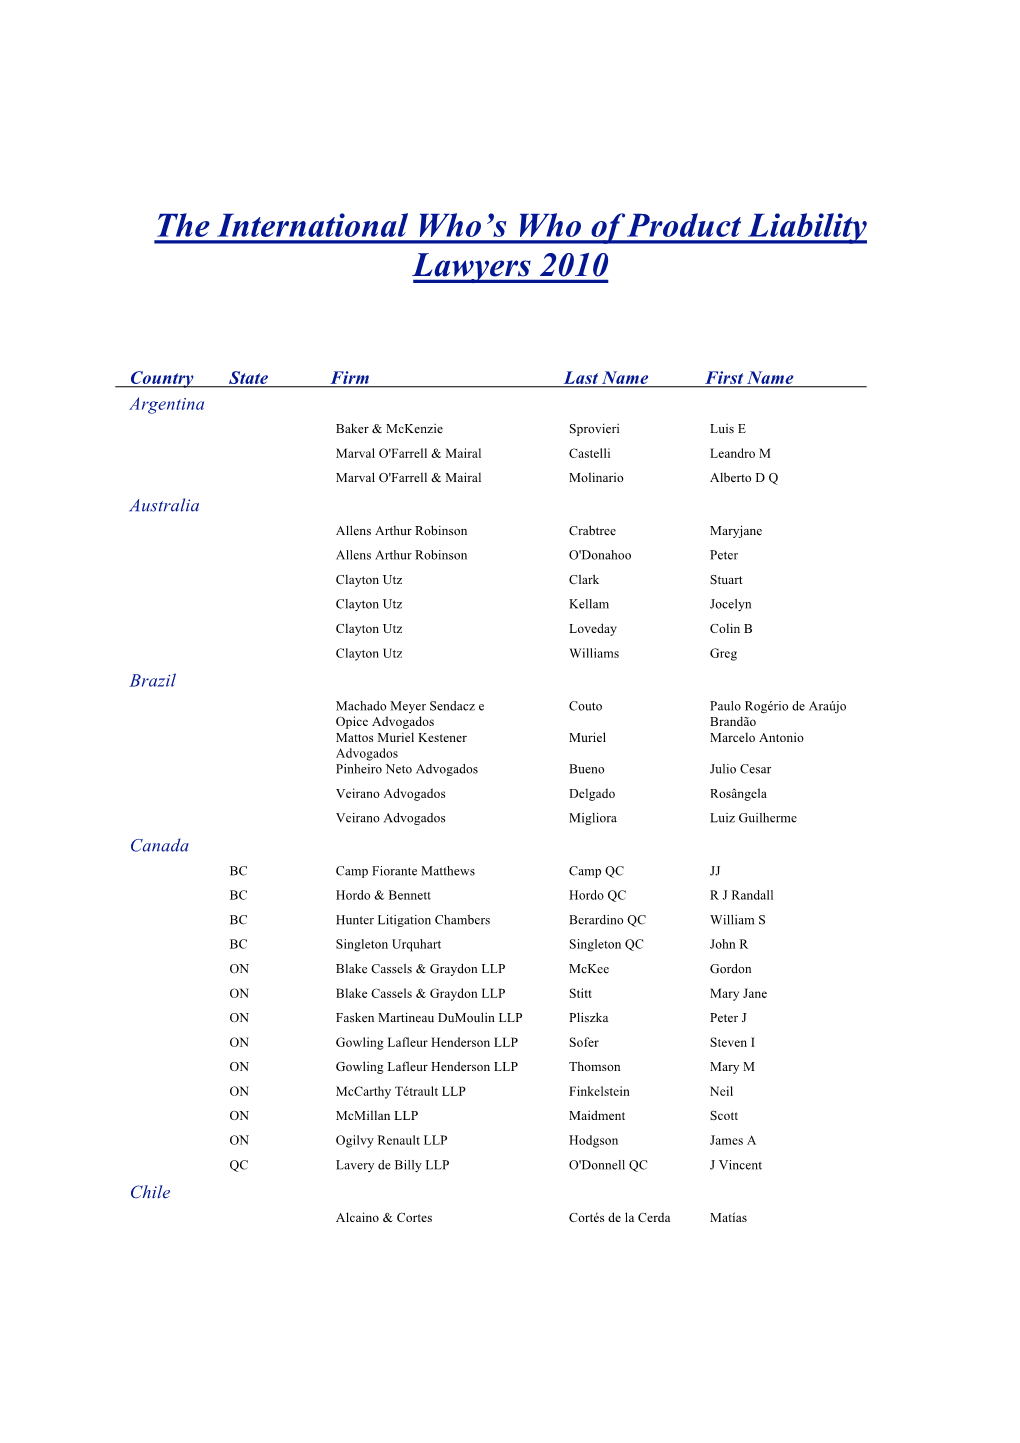 The International Who's Who of Product Liability Lawyers 2010